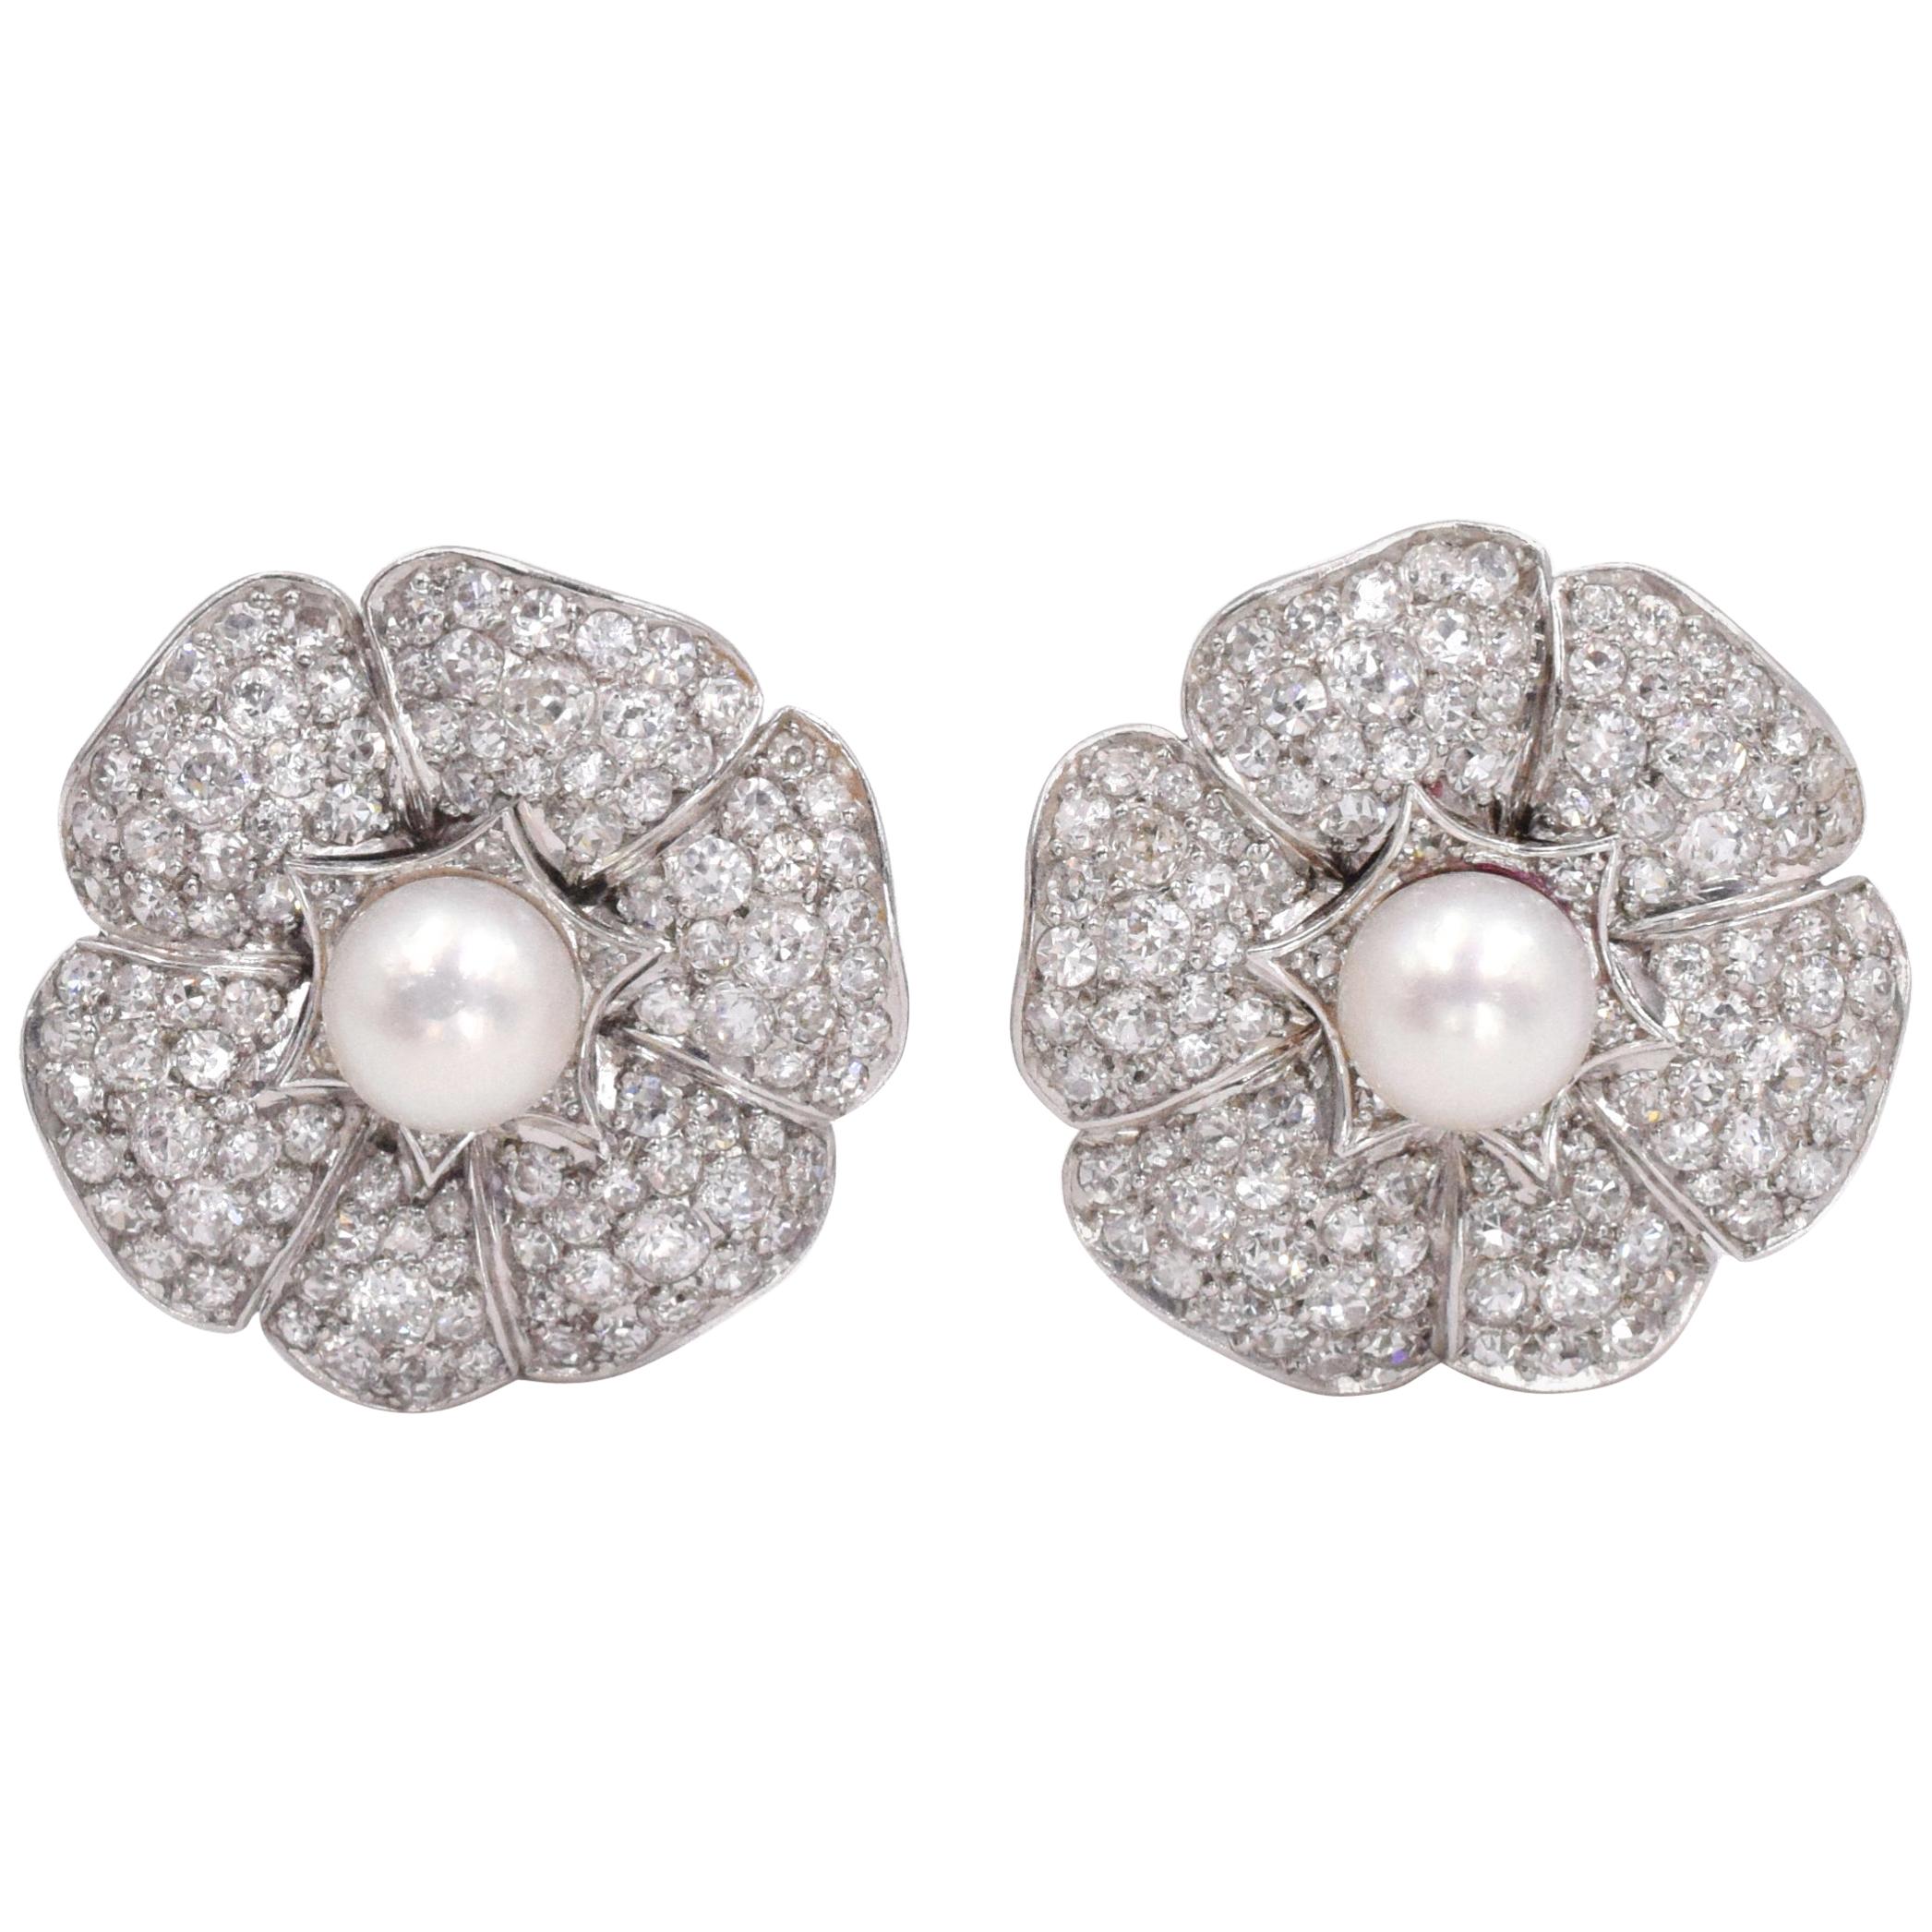 ART DECO style Diamond and Pearl Earring